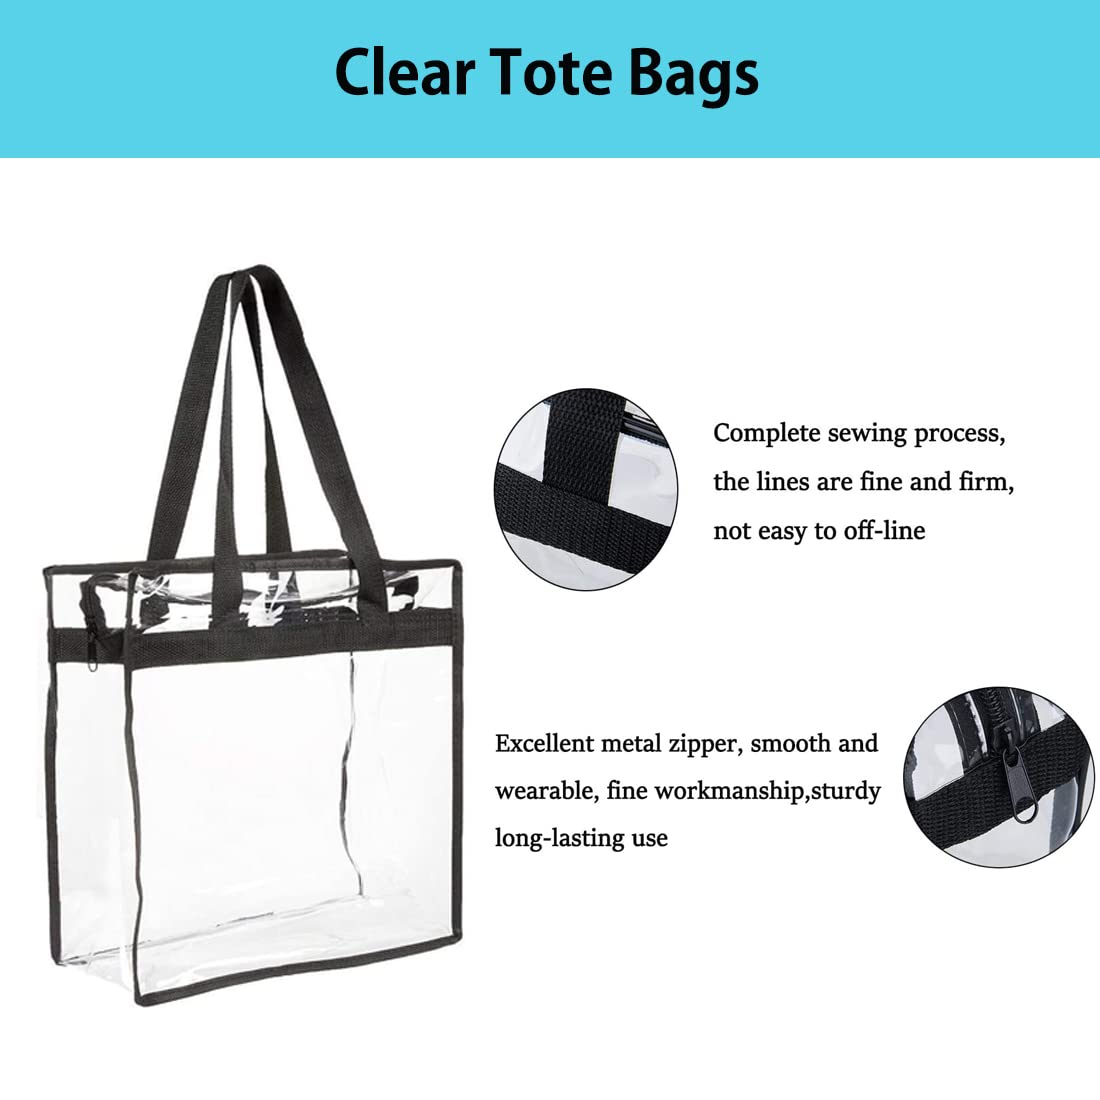 UEOE Clear Tote Bag, Stadium Approved Transparent Bags Security Travel Bag Gym See Through Bag, 30 * 30 * 10cm